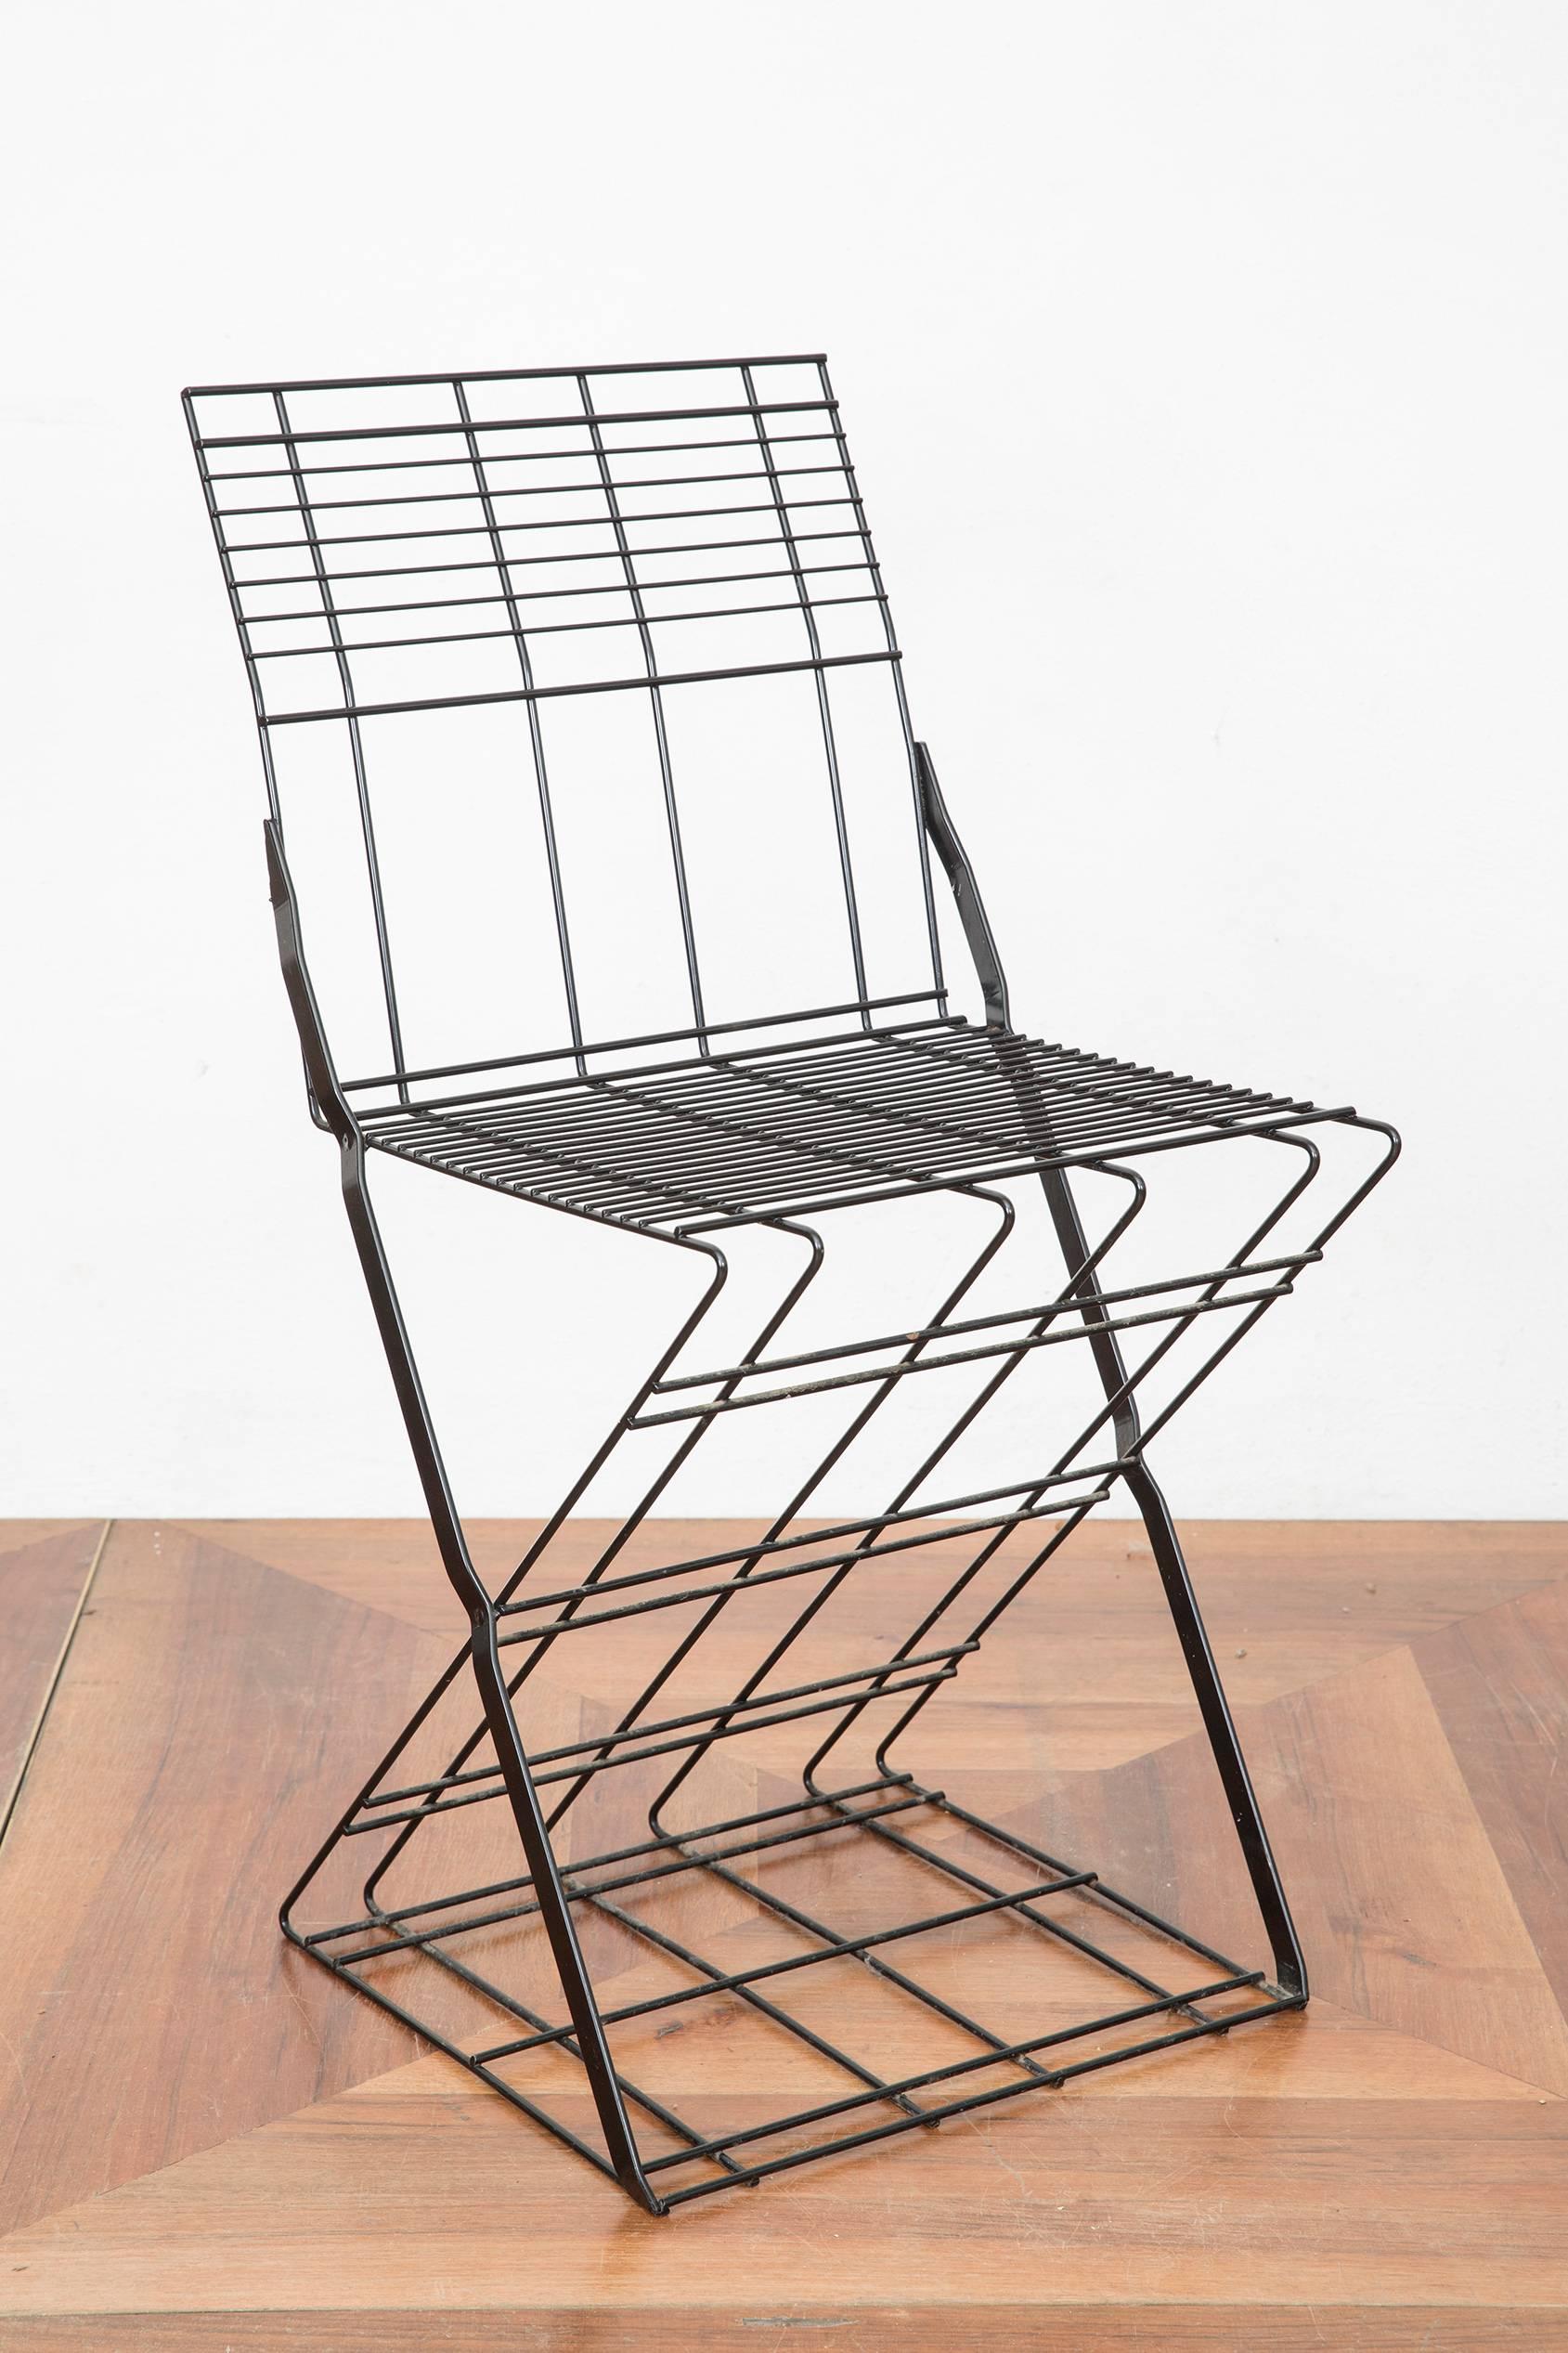 Awesome and weird set of two wired steel Italian chairs from the 1980s, unknown design.